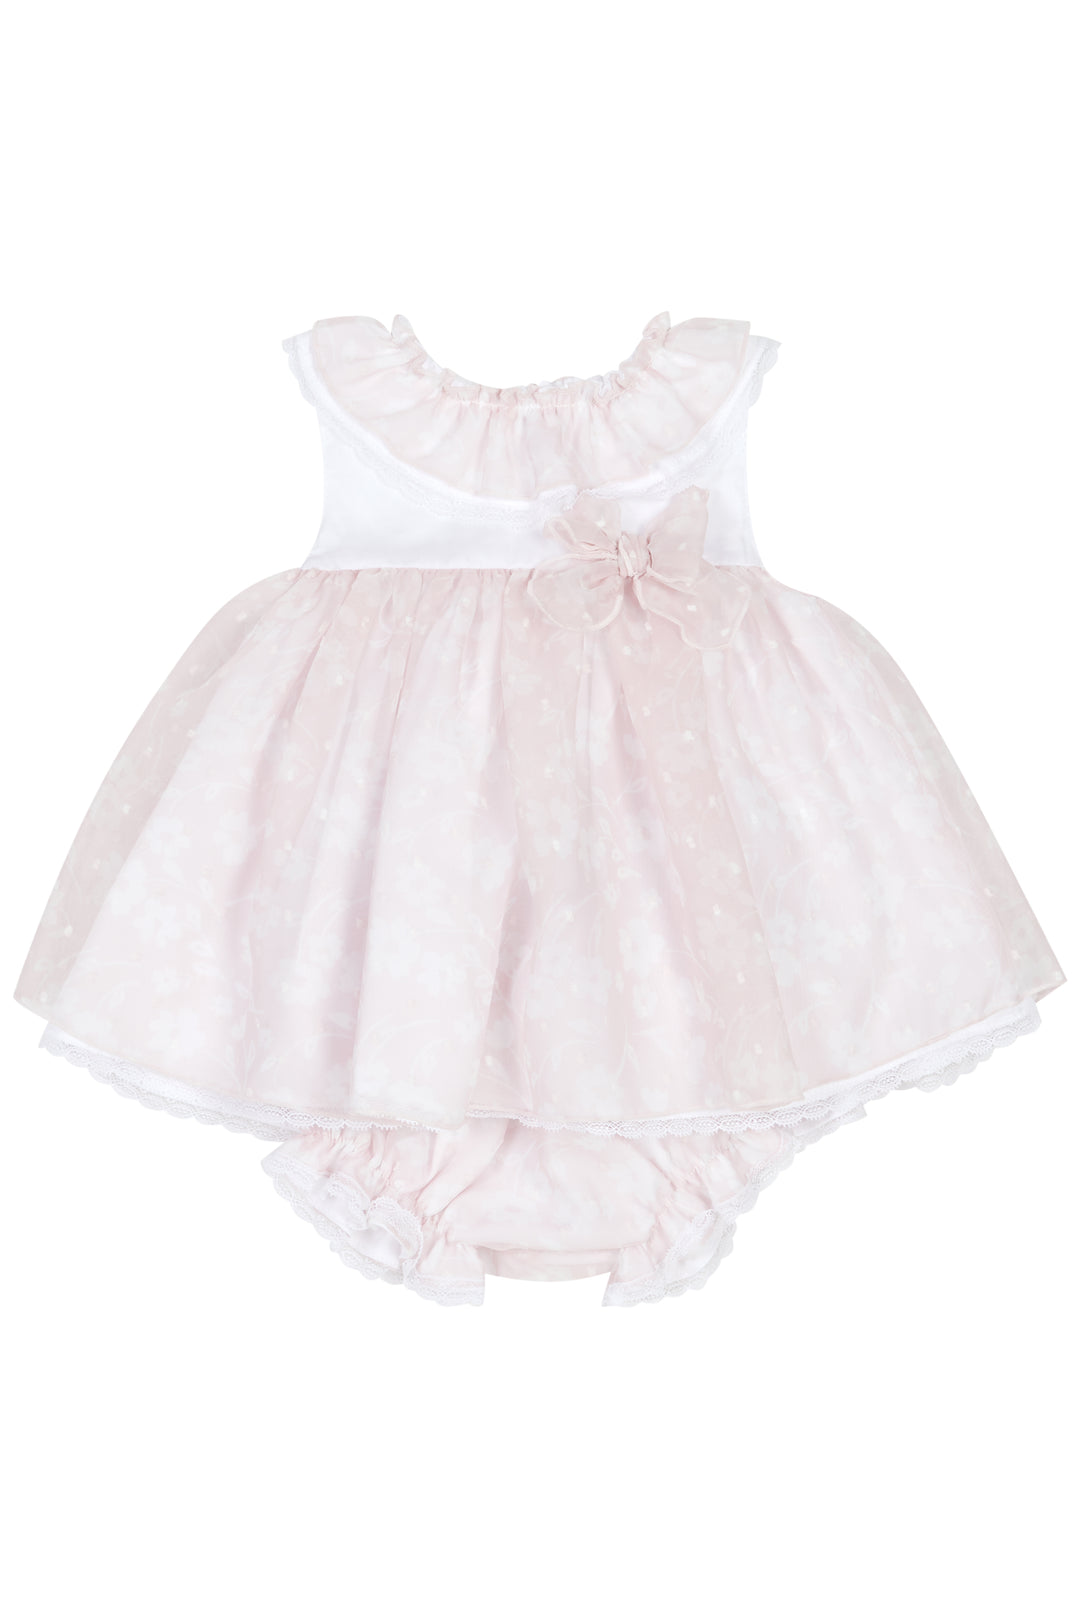 Chic by Deolinda PREORDER "Lily" Pale Pink Tulle Dress & Bloomers | Millie and John